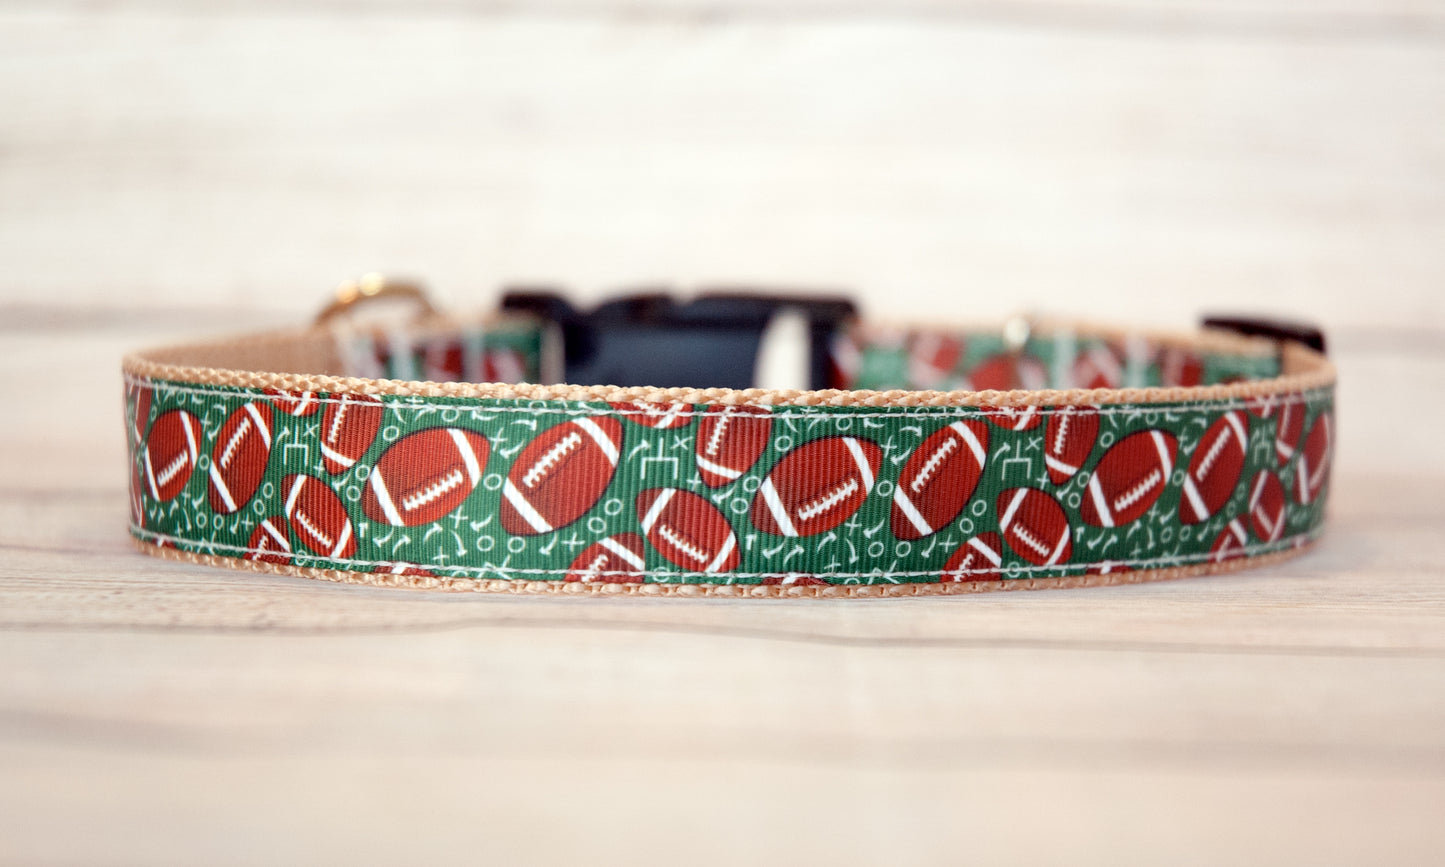 Football dog collar and/or leash. 1" wide